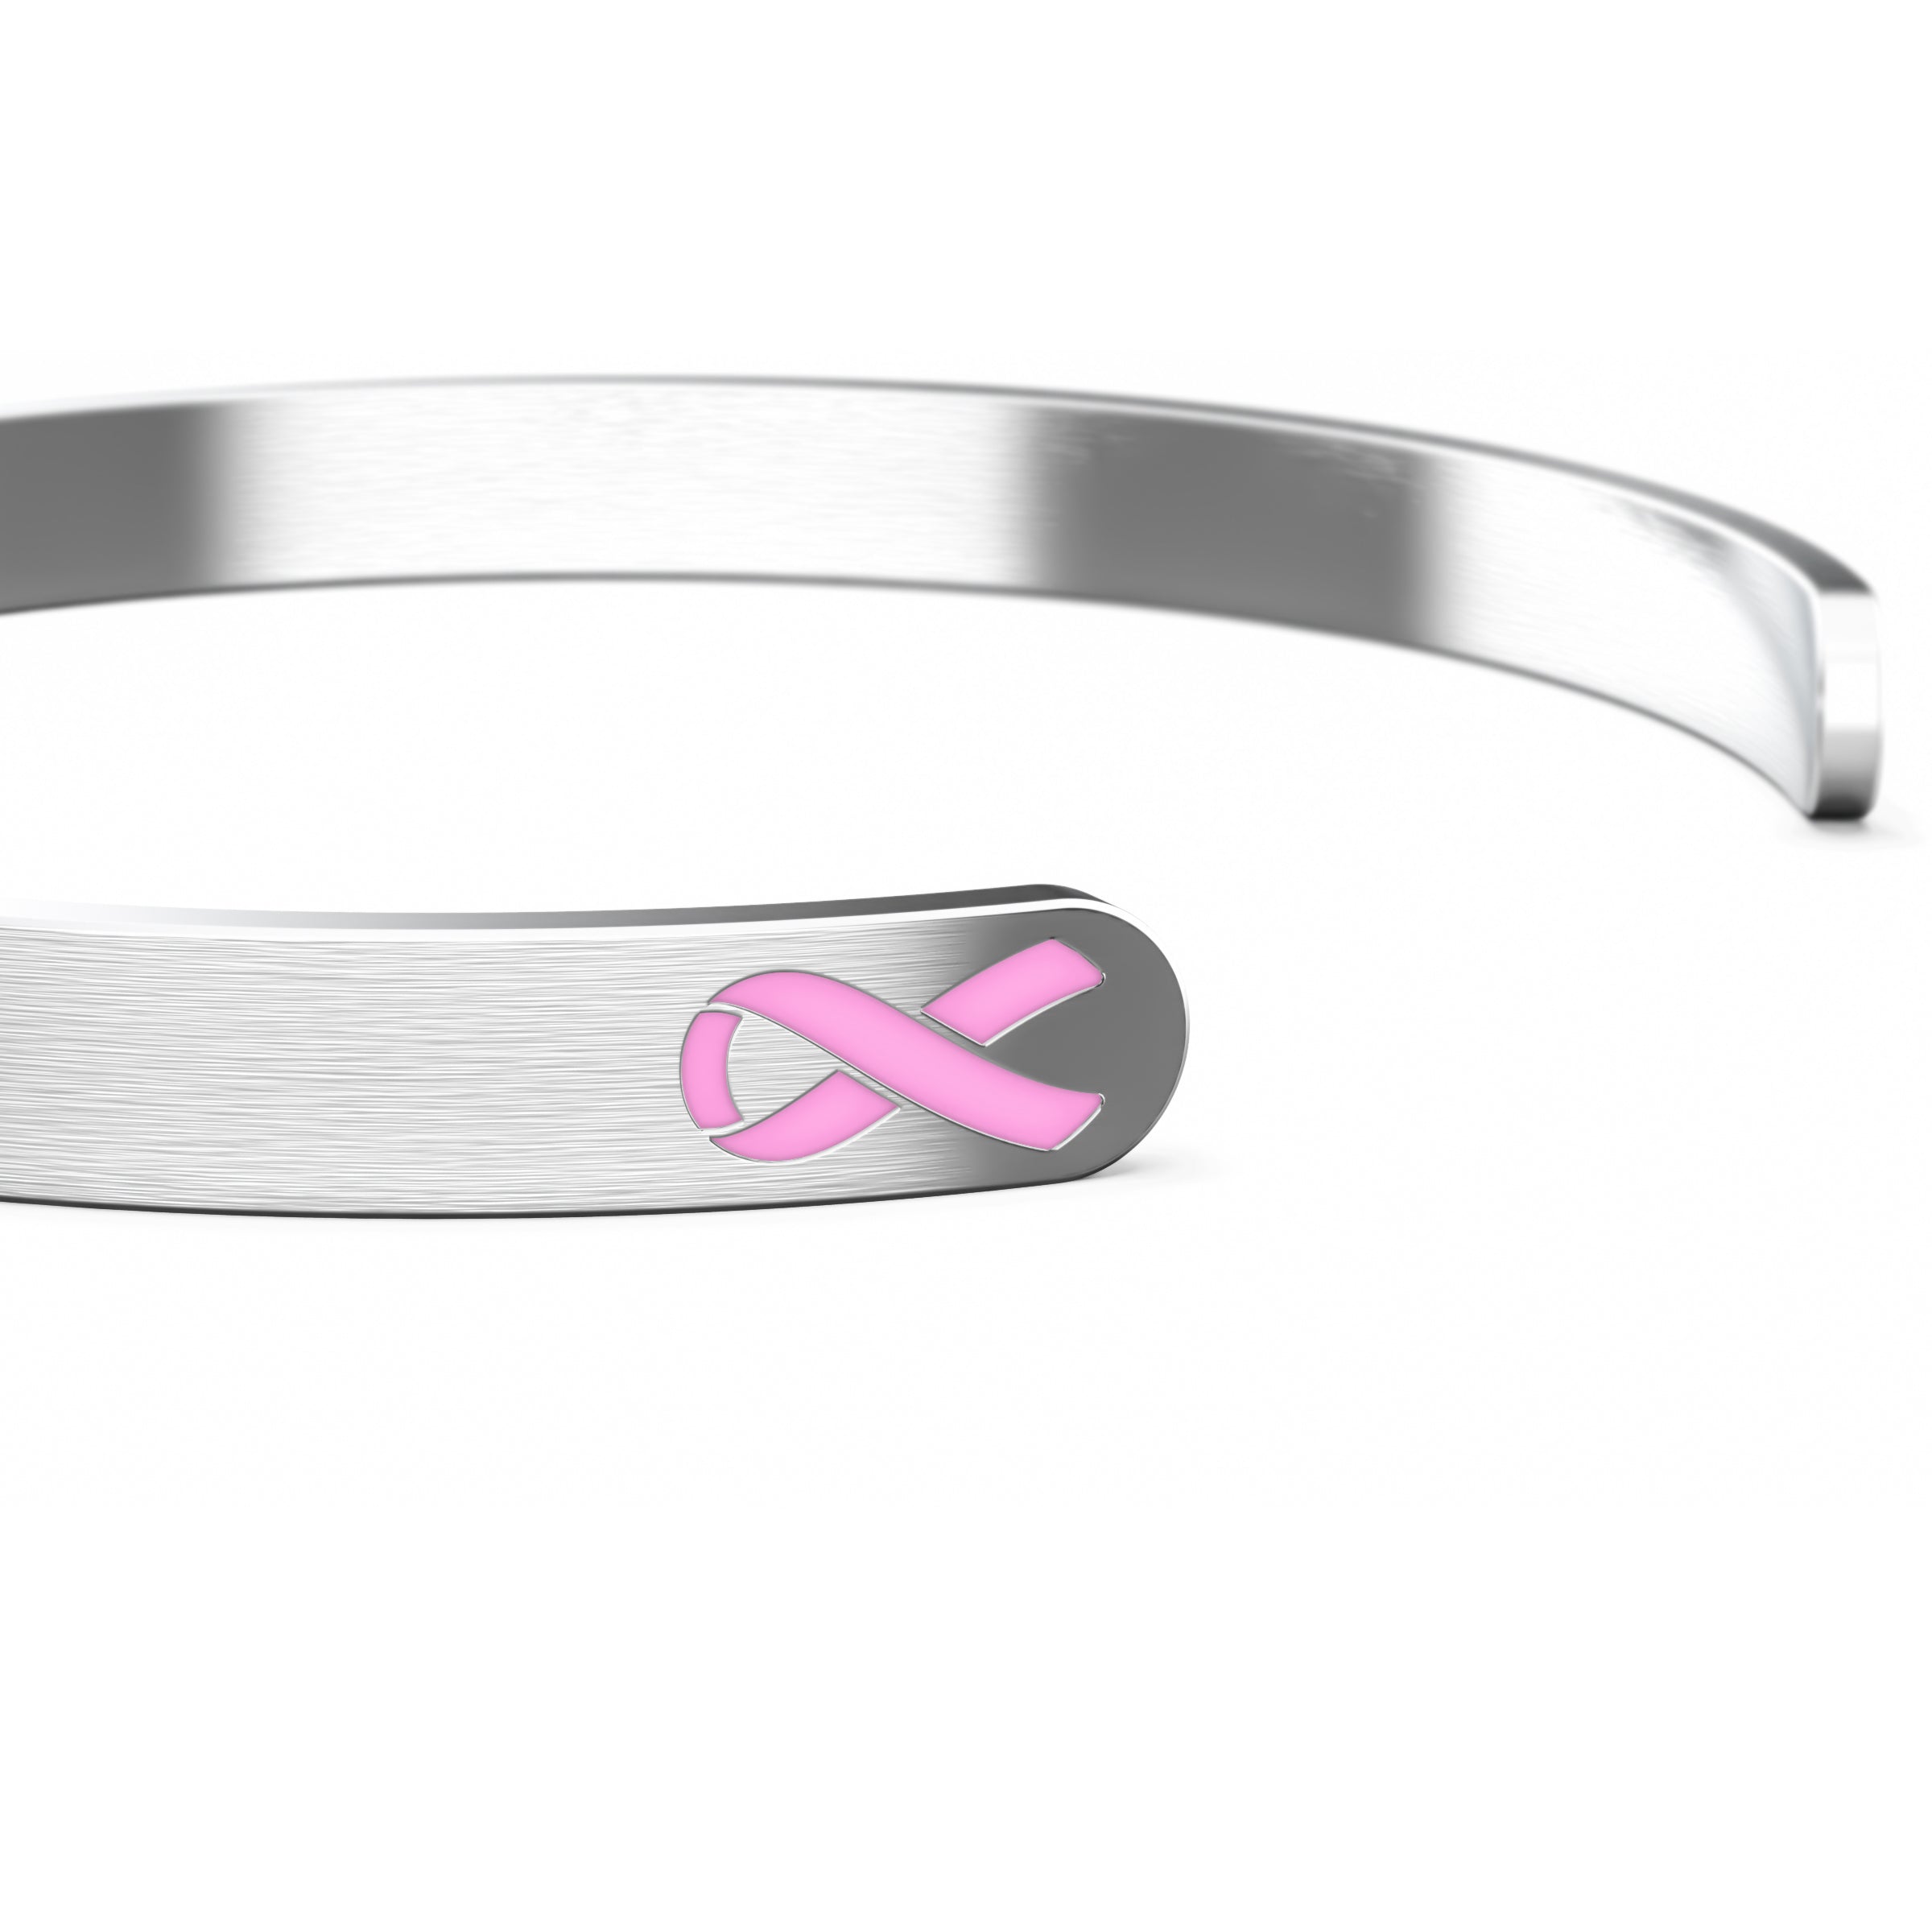 Pink Breast Cancer Awareness Wristband. Hope Courage Faith Love Ladies  Women's Bracelet Silicone Band (1 band - Shipped by Amazon) : Amazon.co.uk:  Handmade Products